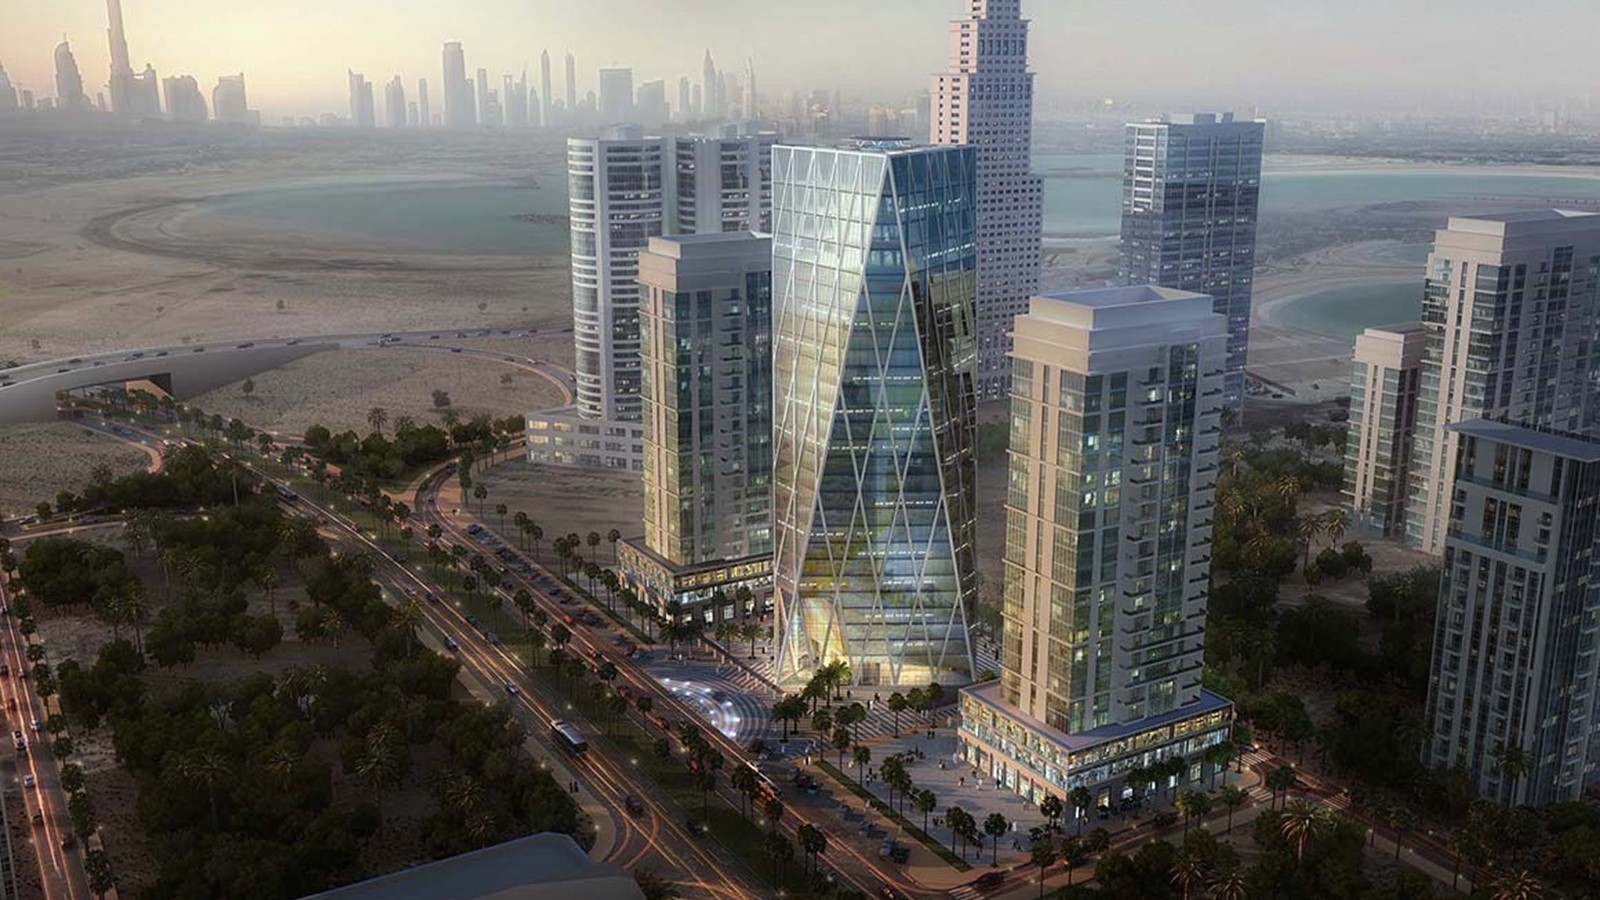 Citygate is the newest and most iconic landmark in Sharjah located at the intersection of Dubai and Sharjah